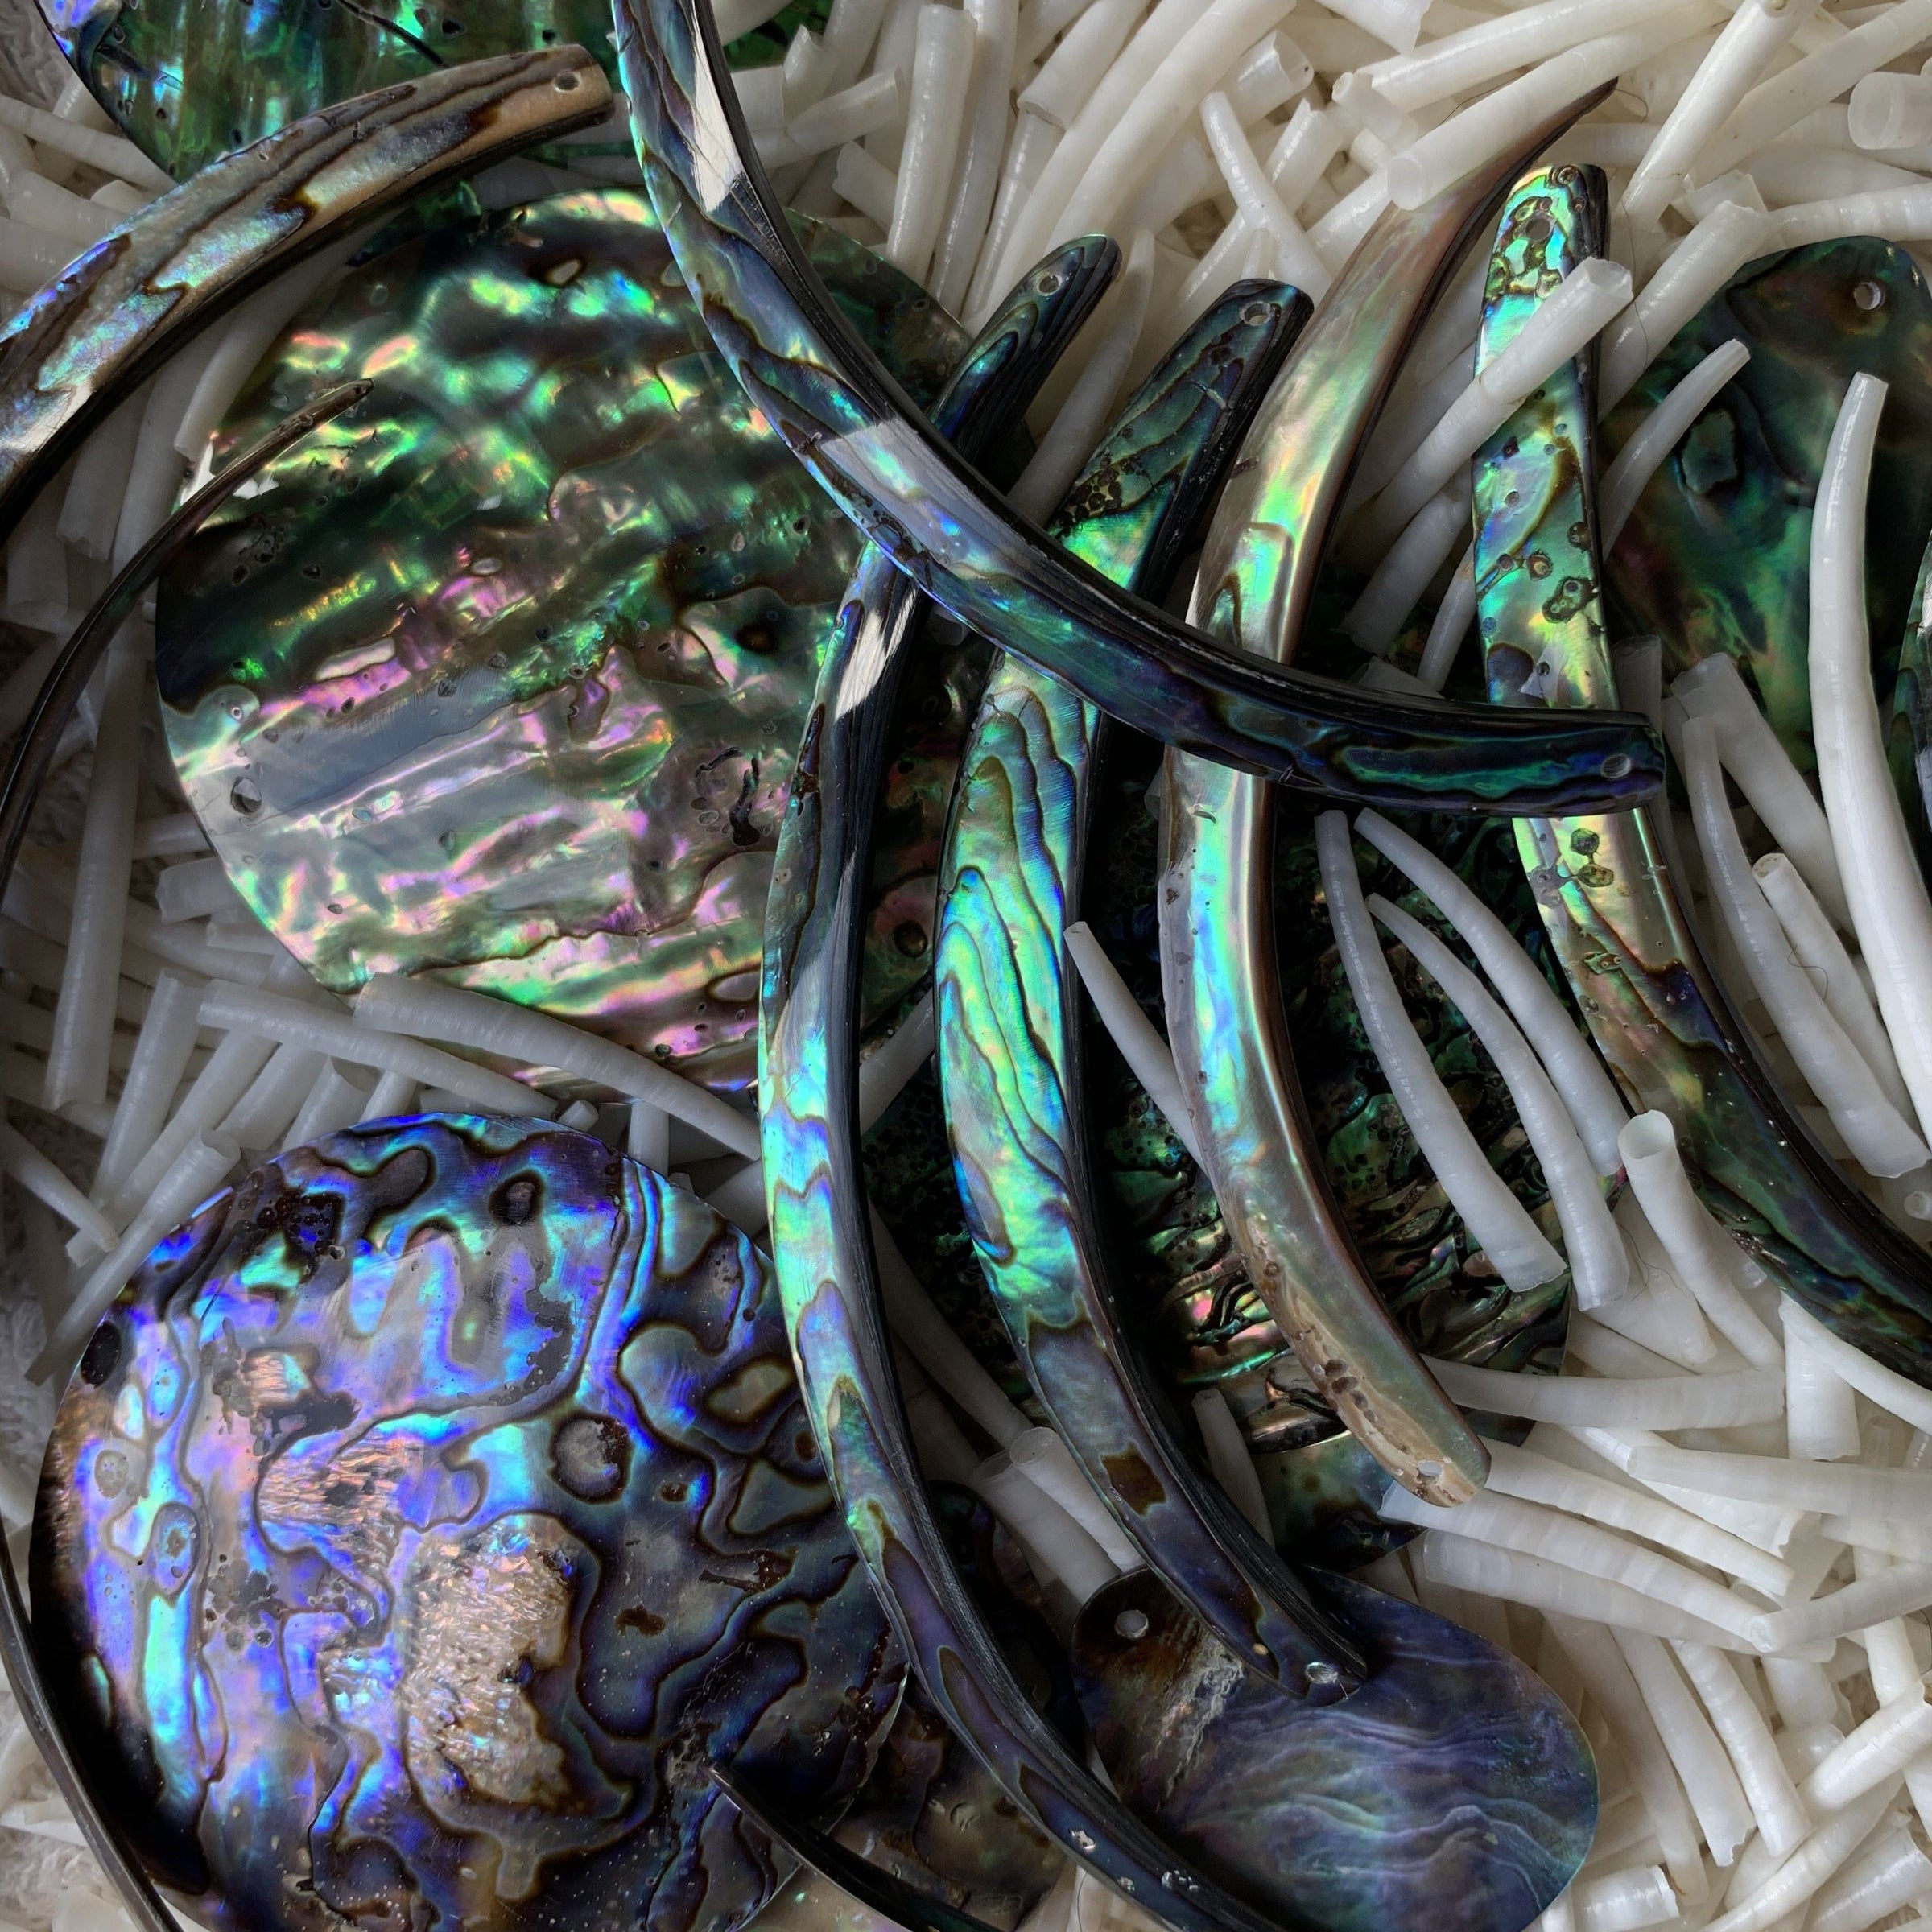 The collections has Dentalium, smooth and ridged, colorful Ribs, Rims of the abalone shells, Abalone drops and discs.